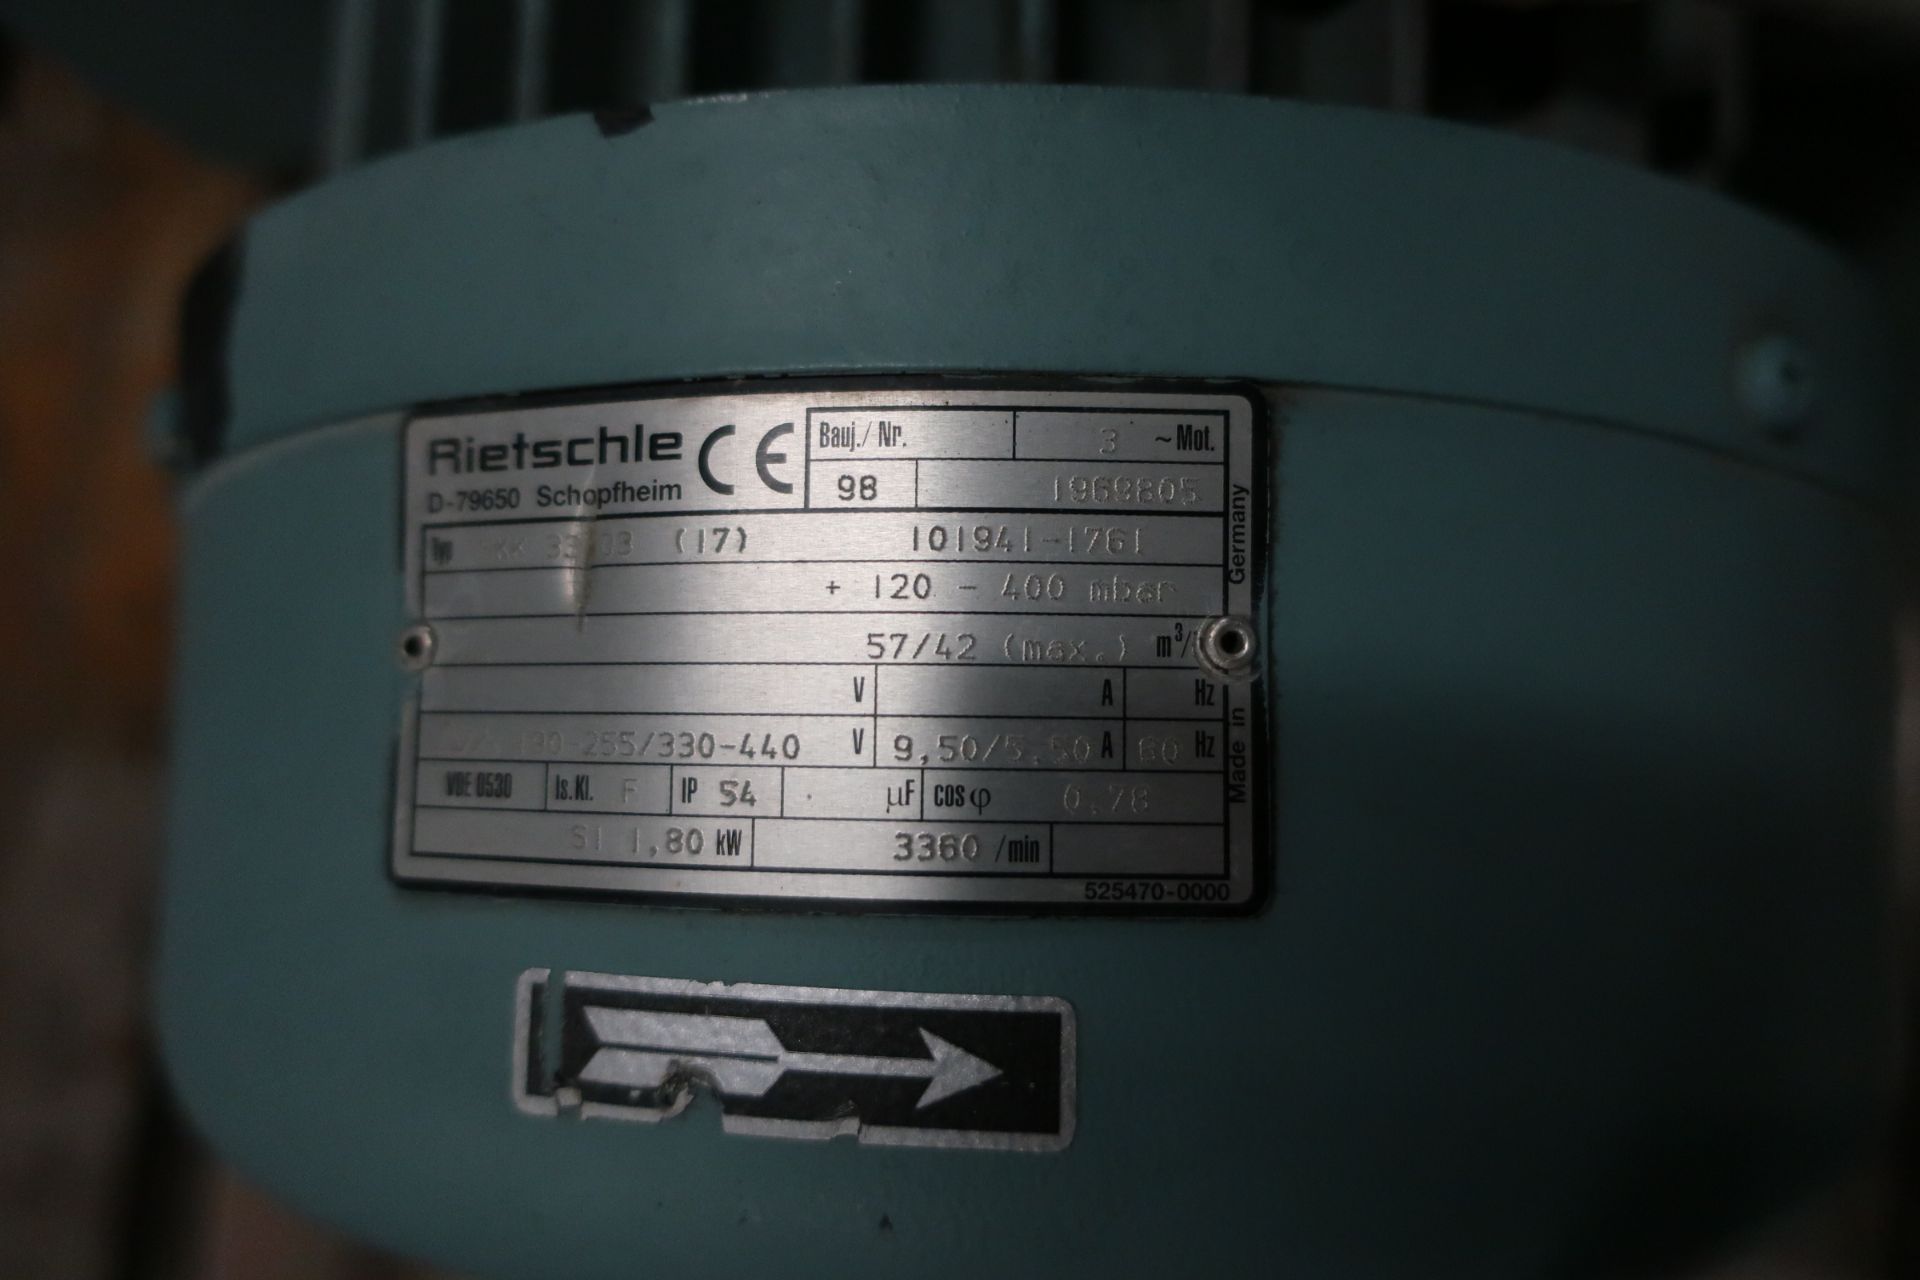 Rietschle Blower Unit 1.8 kW 3360/min - Image 2 of 2